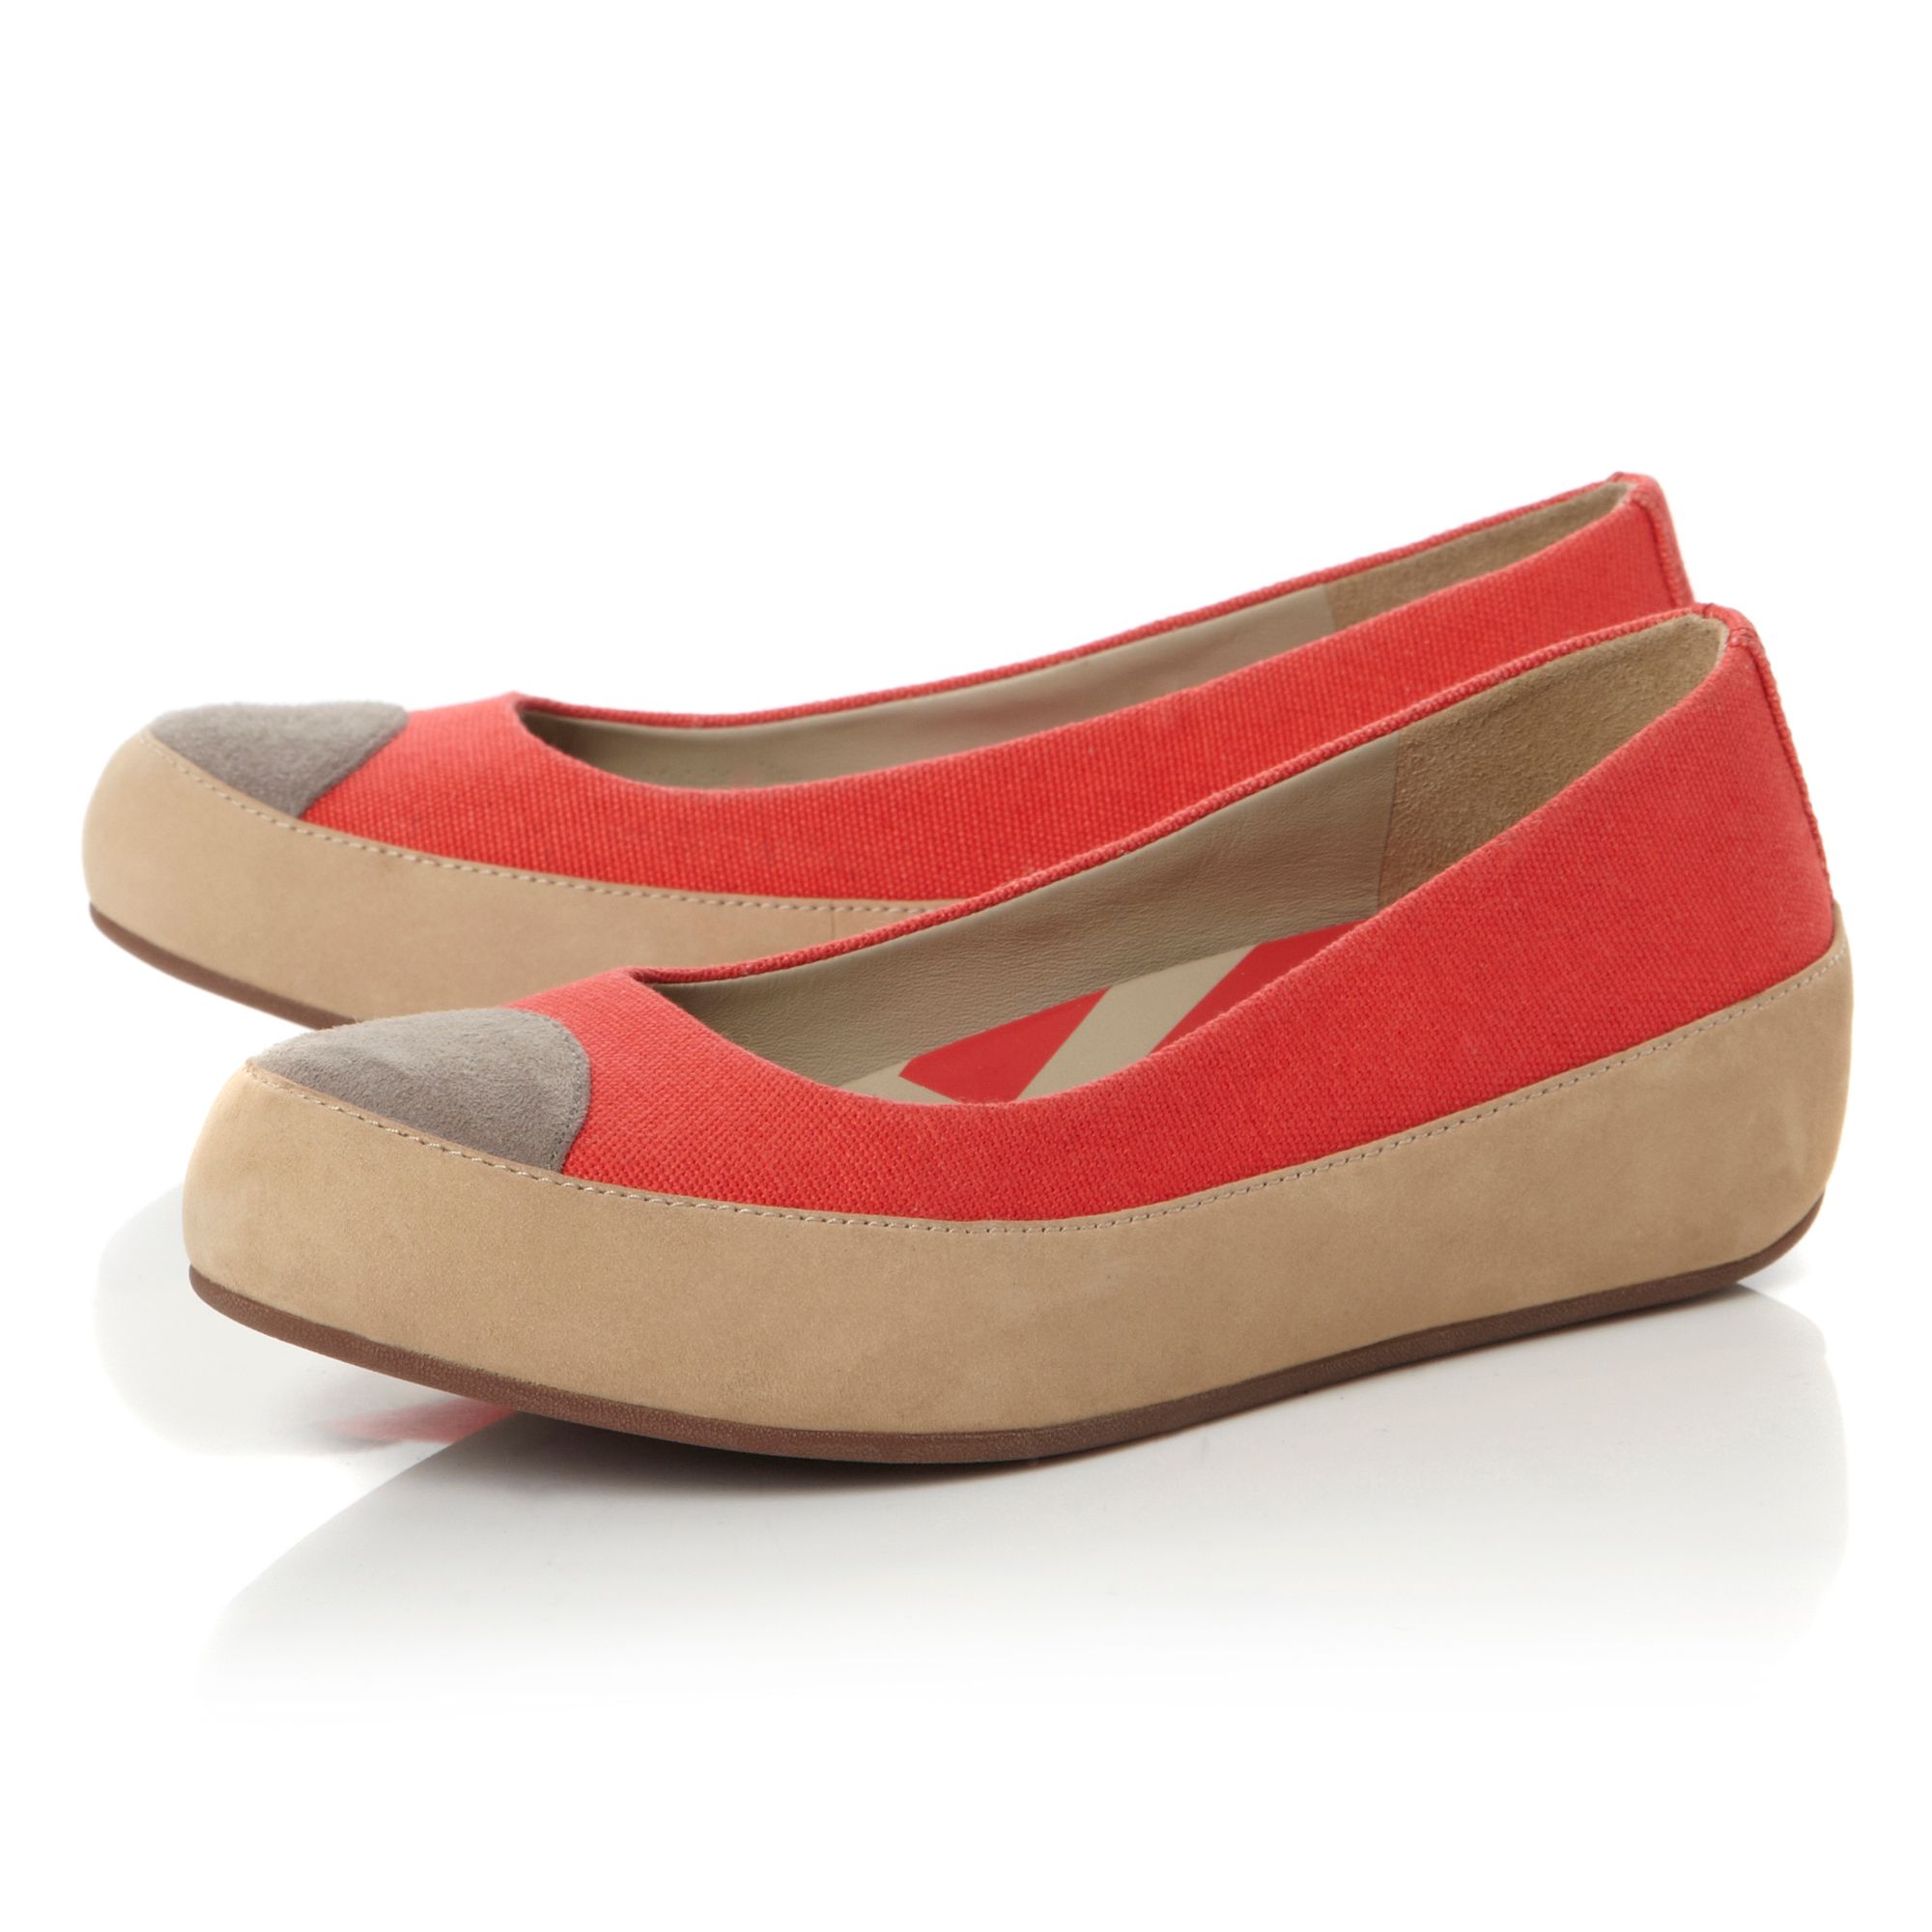 Fitflop Due Canvas Flatform Canvas Ballerina Shoes in Red - Lyst